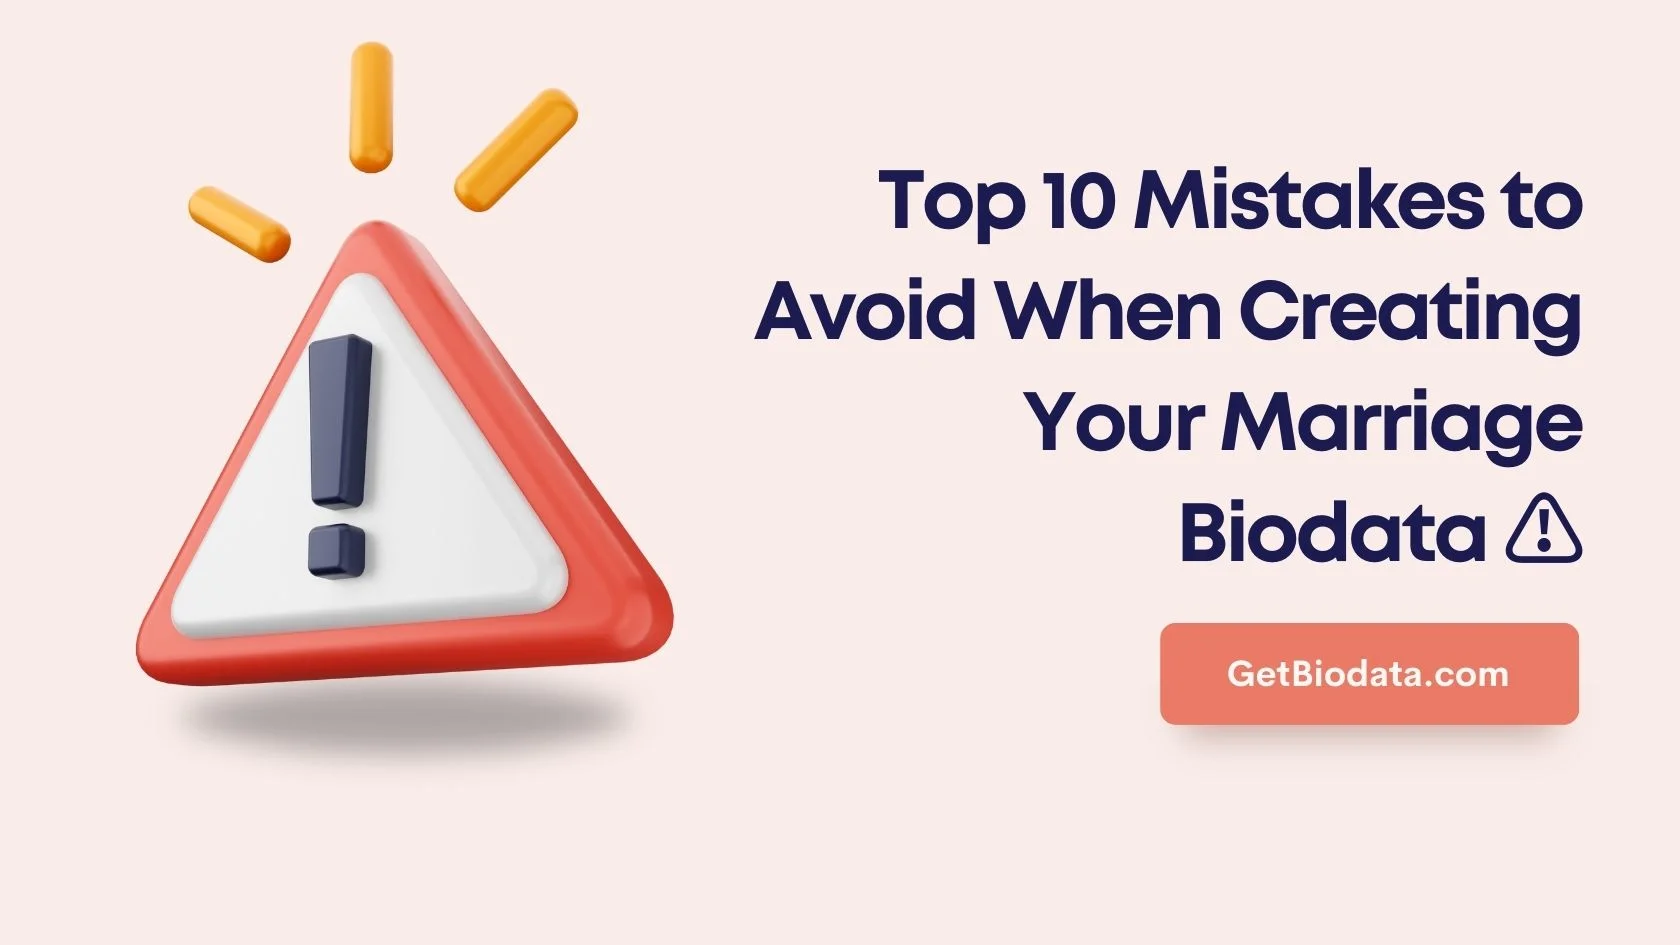 Top 10 Fatal Mistakes to Avoid When Creating Your Marriage Biodata